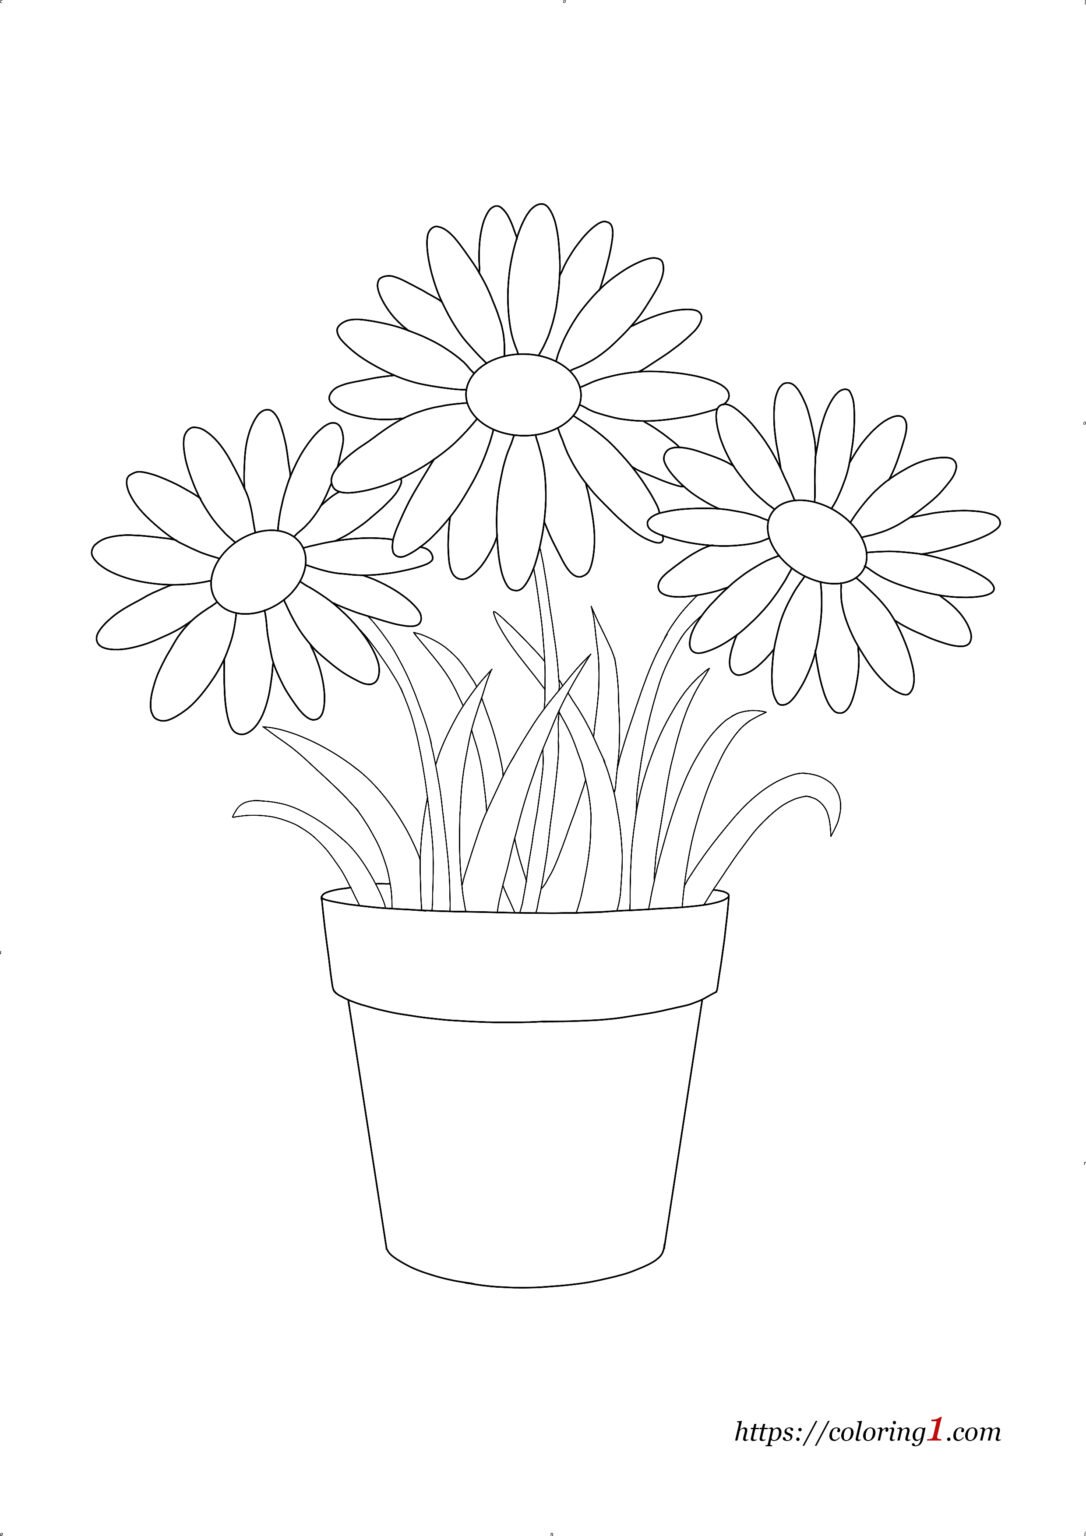 Daisy Flower Coloring Pages - 2 Free Coloring Sheets (2021)